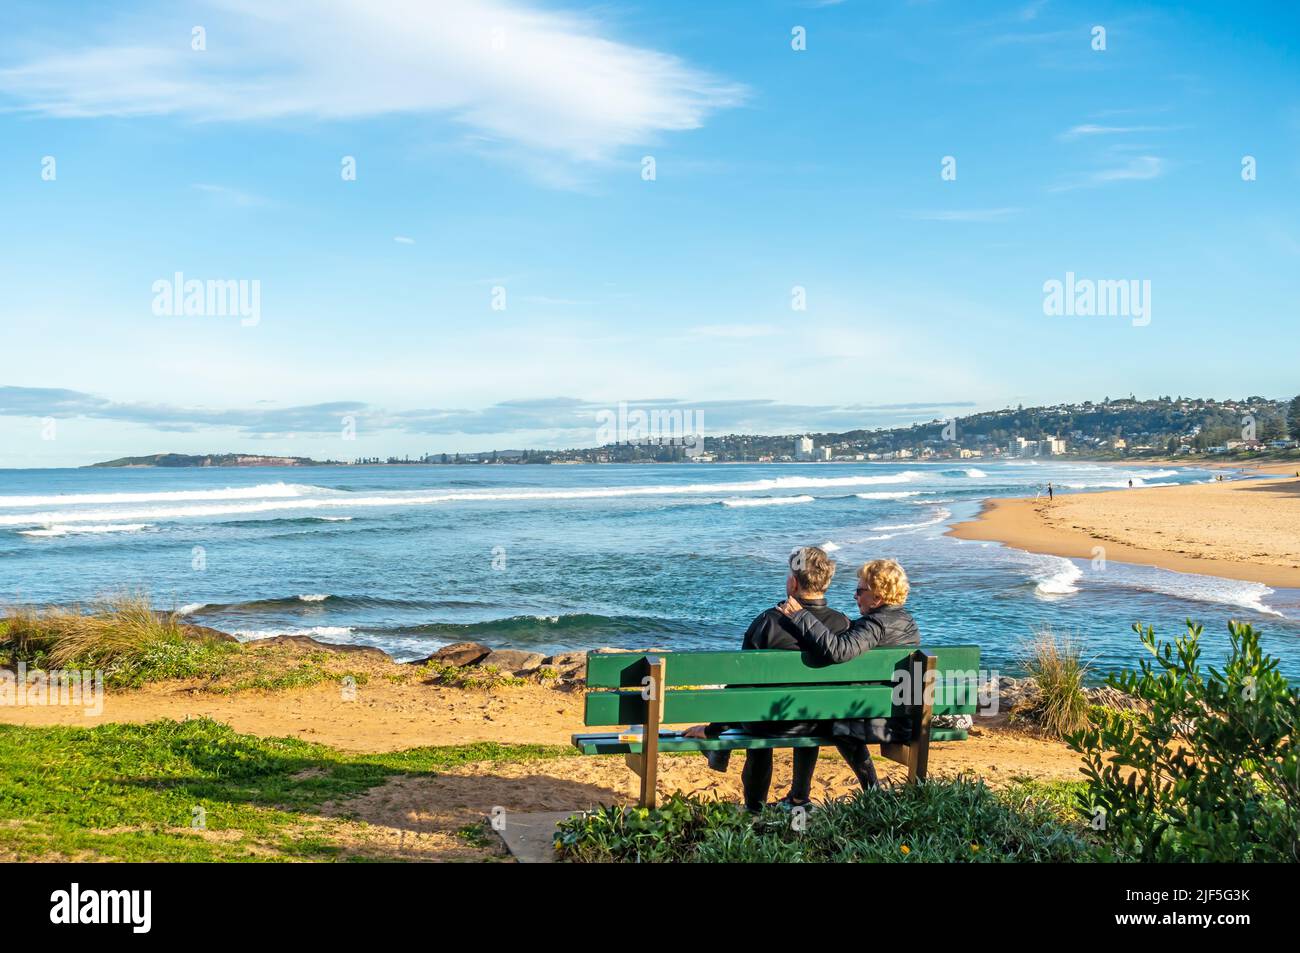 A couple in winter sun watching surf at Narrabeen, Sydney Australia. Stock Photo